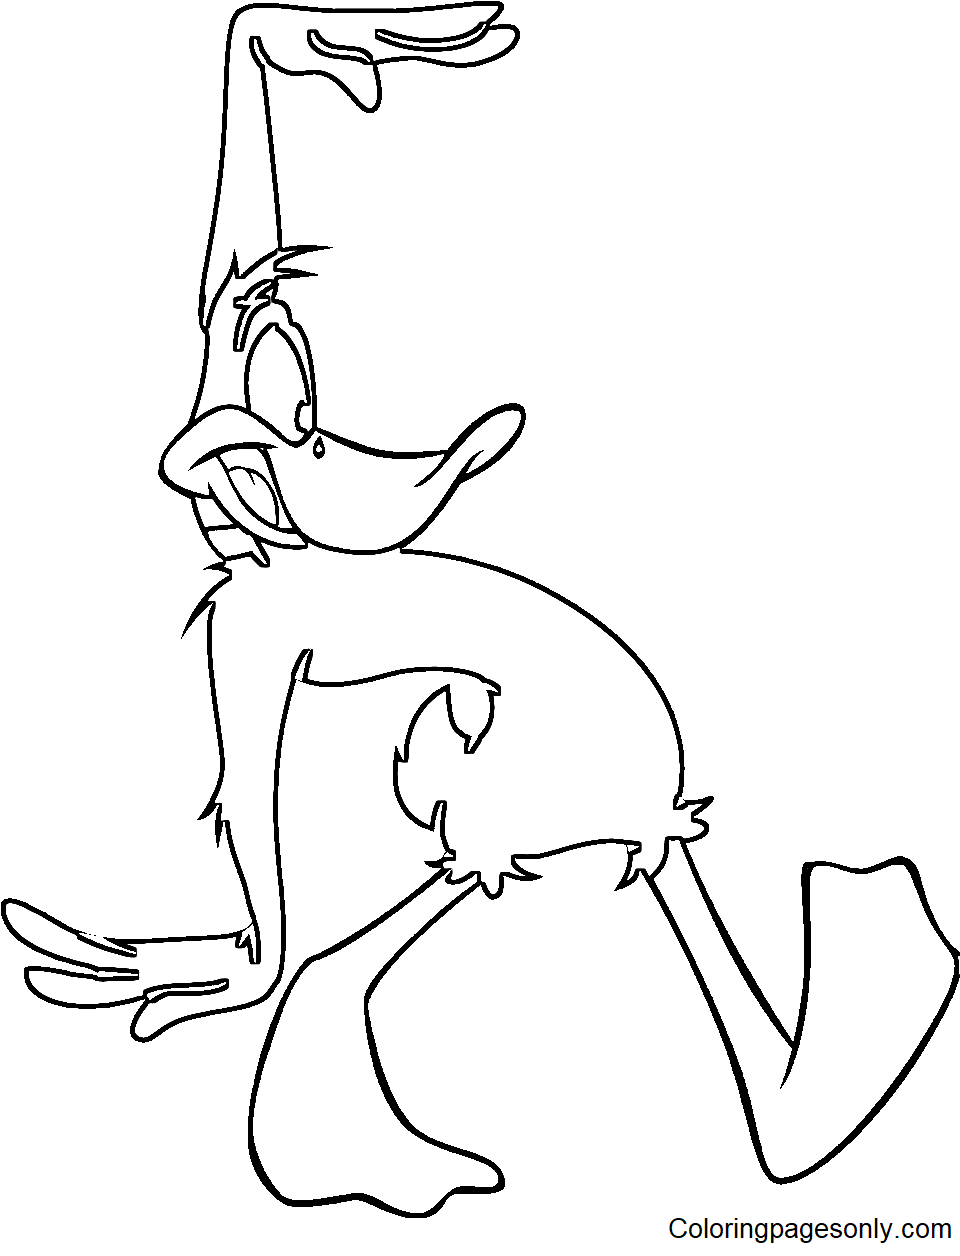 Funny Daffy Duck Coloring Page